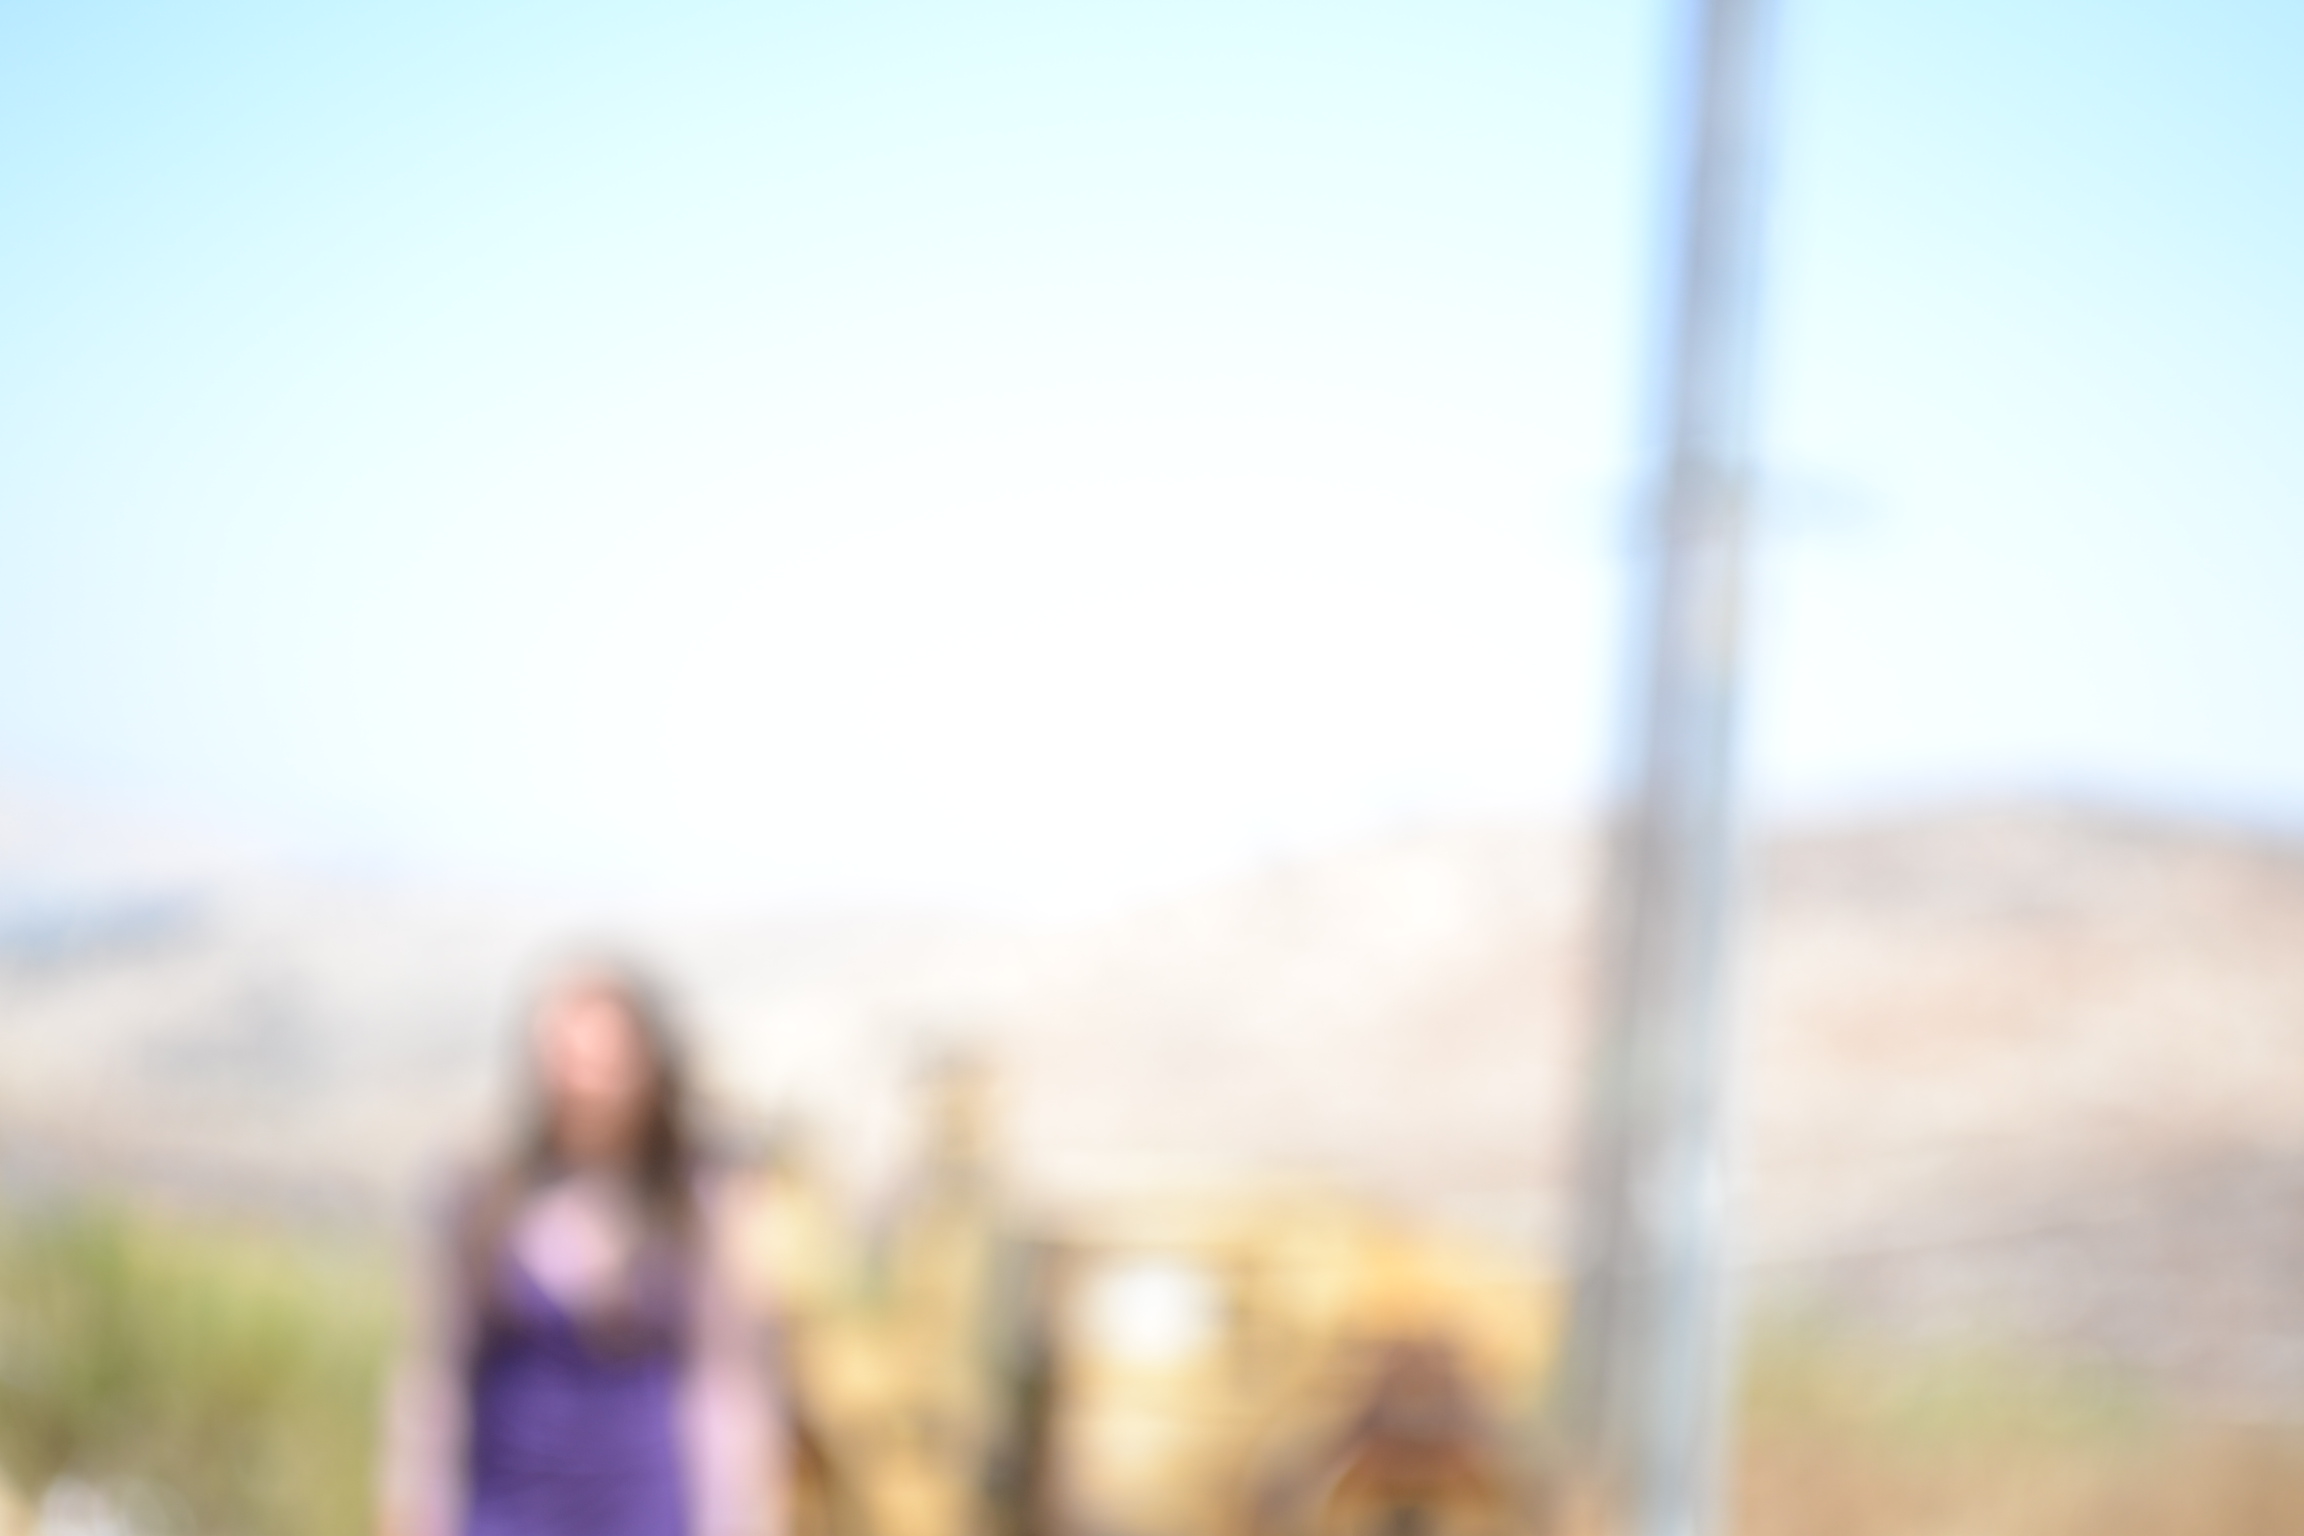 Blurred image of writer Rivka bat-Cohen in the West Bank